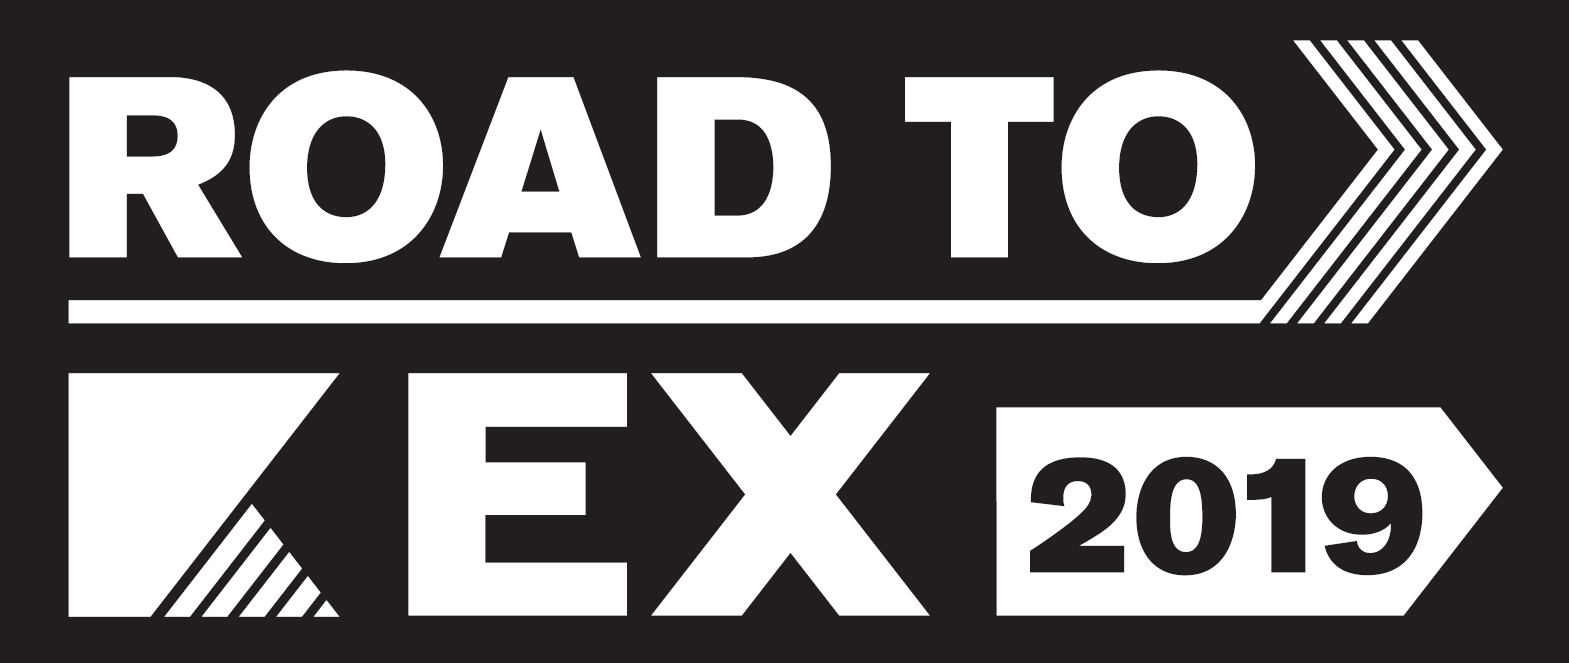 ROAD TO EX 2019